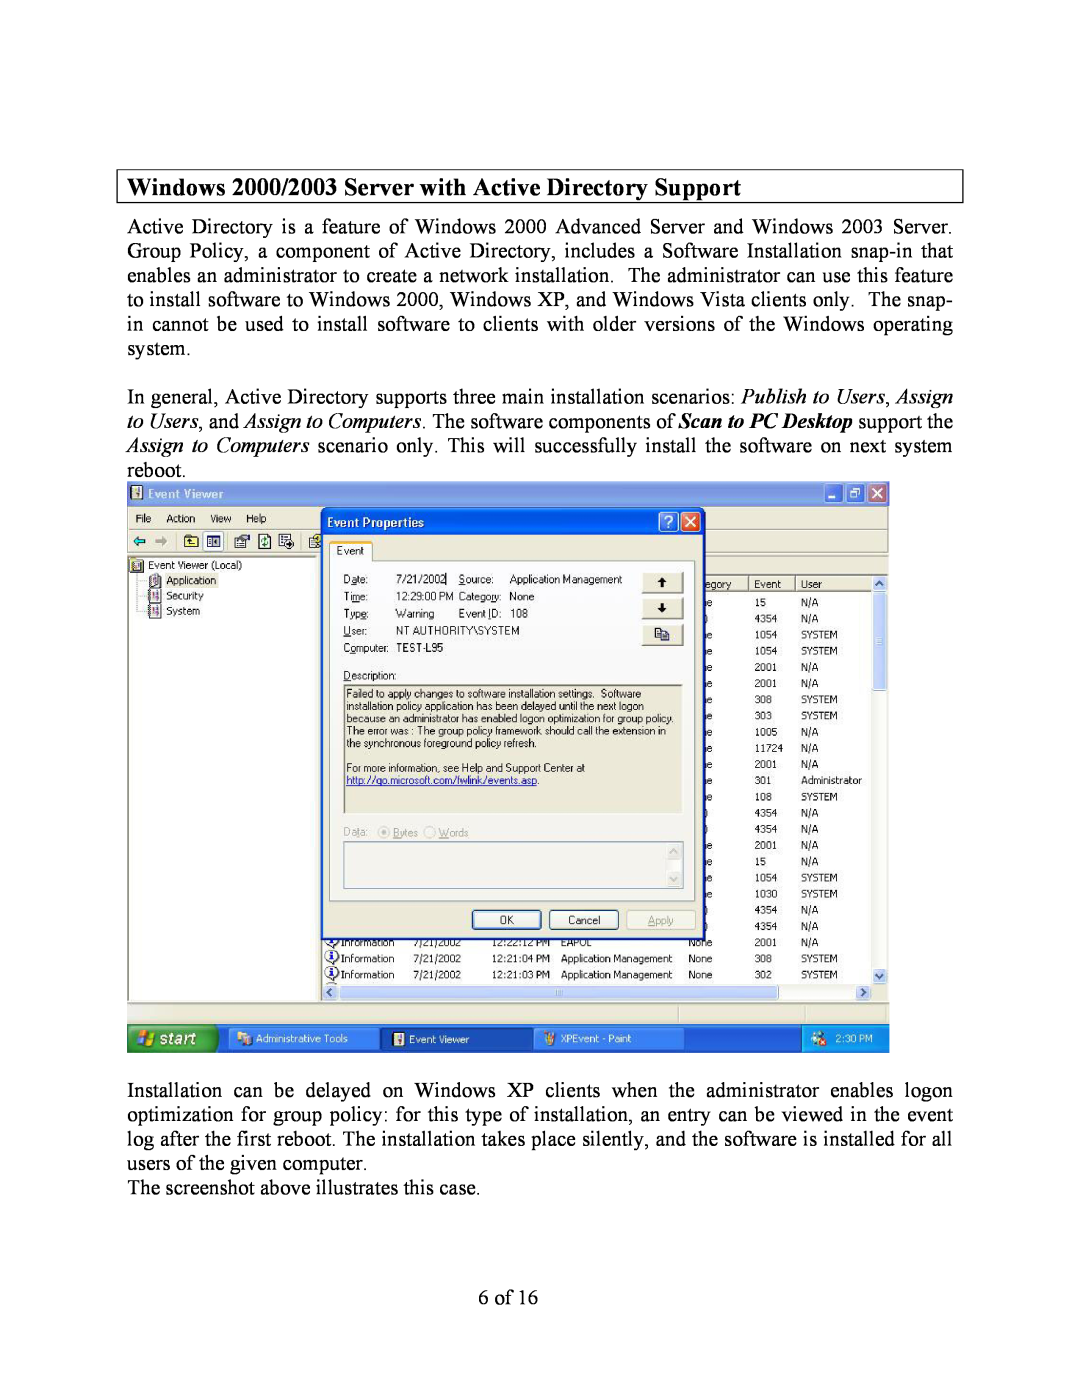 Xerox V9.0 manual The screenshot above illustrates this case 6 of 